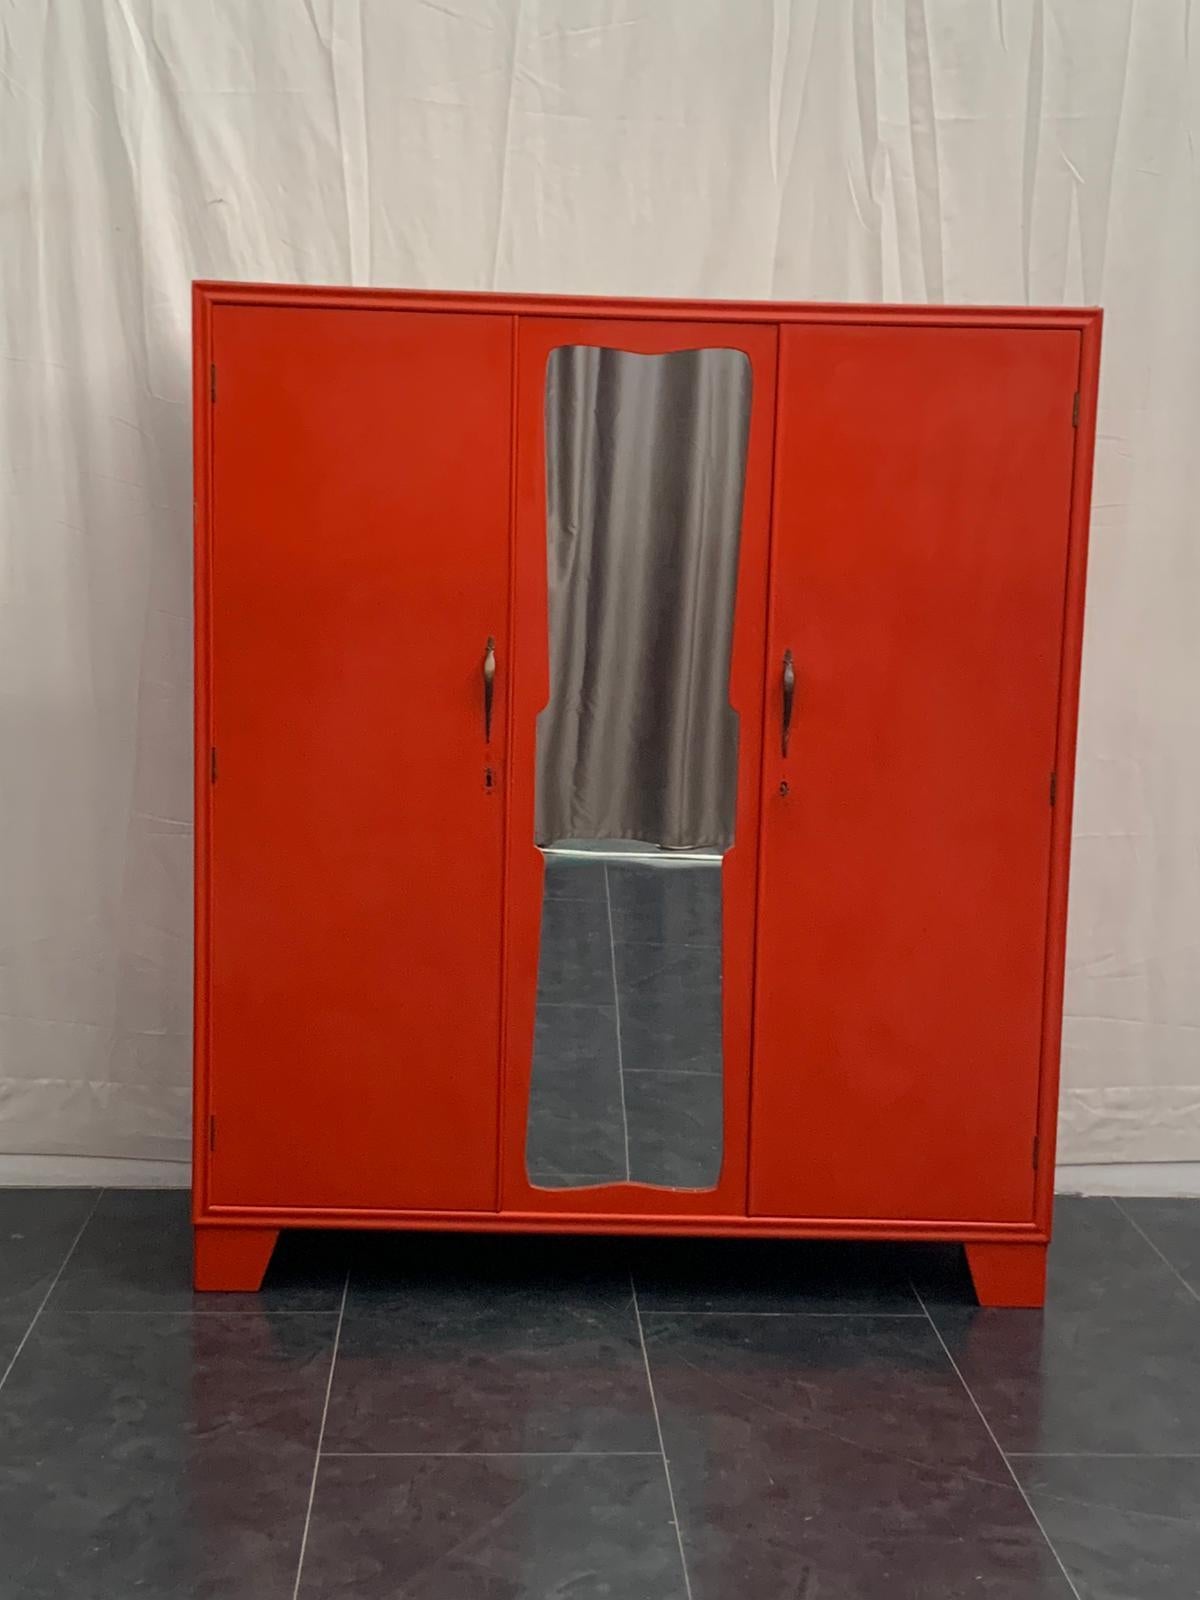 Art Deco wardrobe in lacquered red coral wood, from the 1930s. Slight wear and tear due to age and use, missing key vents.
Packaging with bubble wrap and cardboard boxes is included. If the wooden packaging is needed (fumigated crates or boxes) for